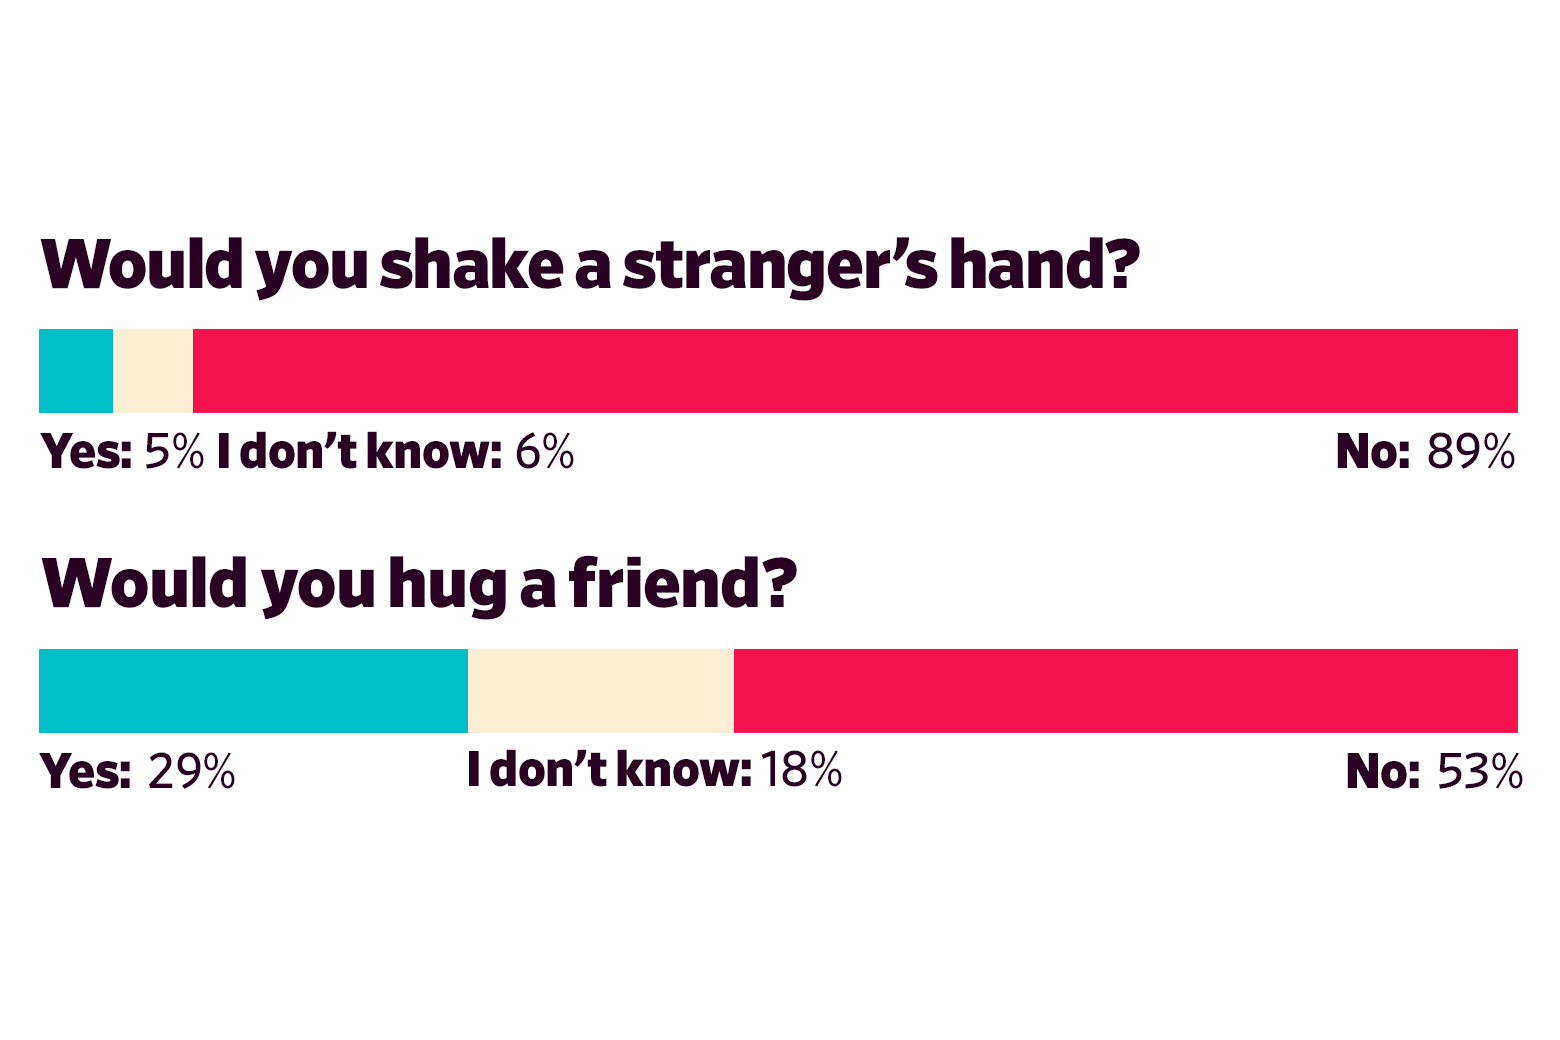 Would you shake a stranger’s hand? Yes: 5 I don’t know: 6 No: 89  Would you hug a friend? Yes: 29 I don’t know: 18 No: 53